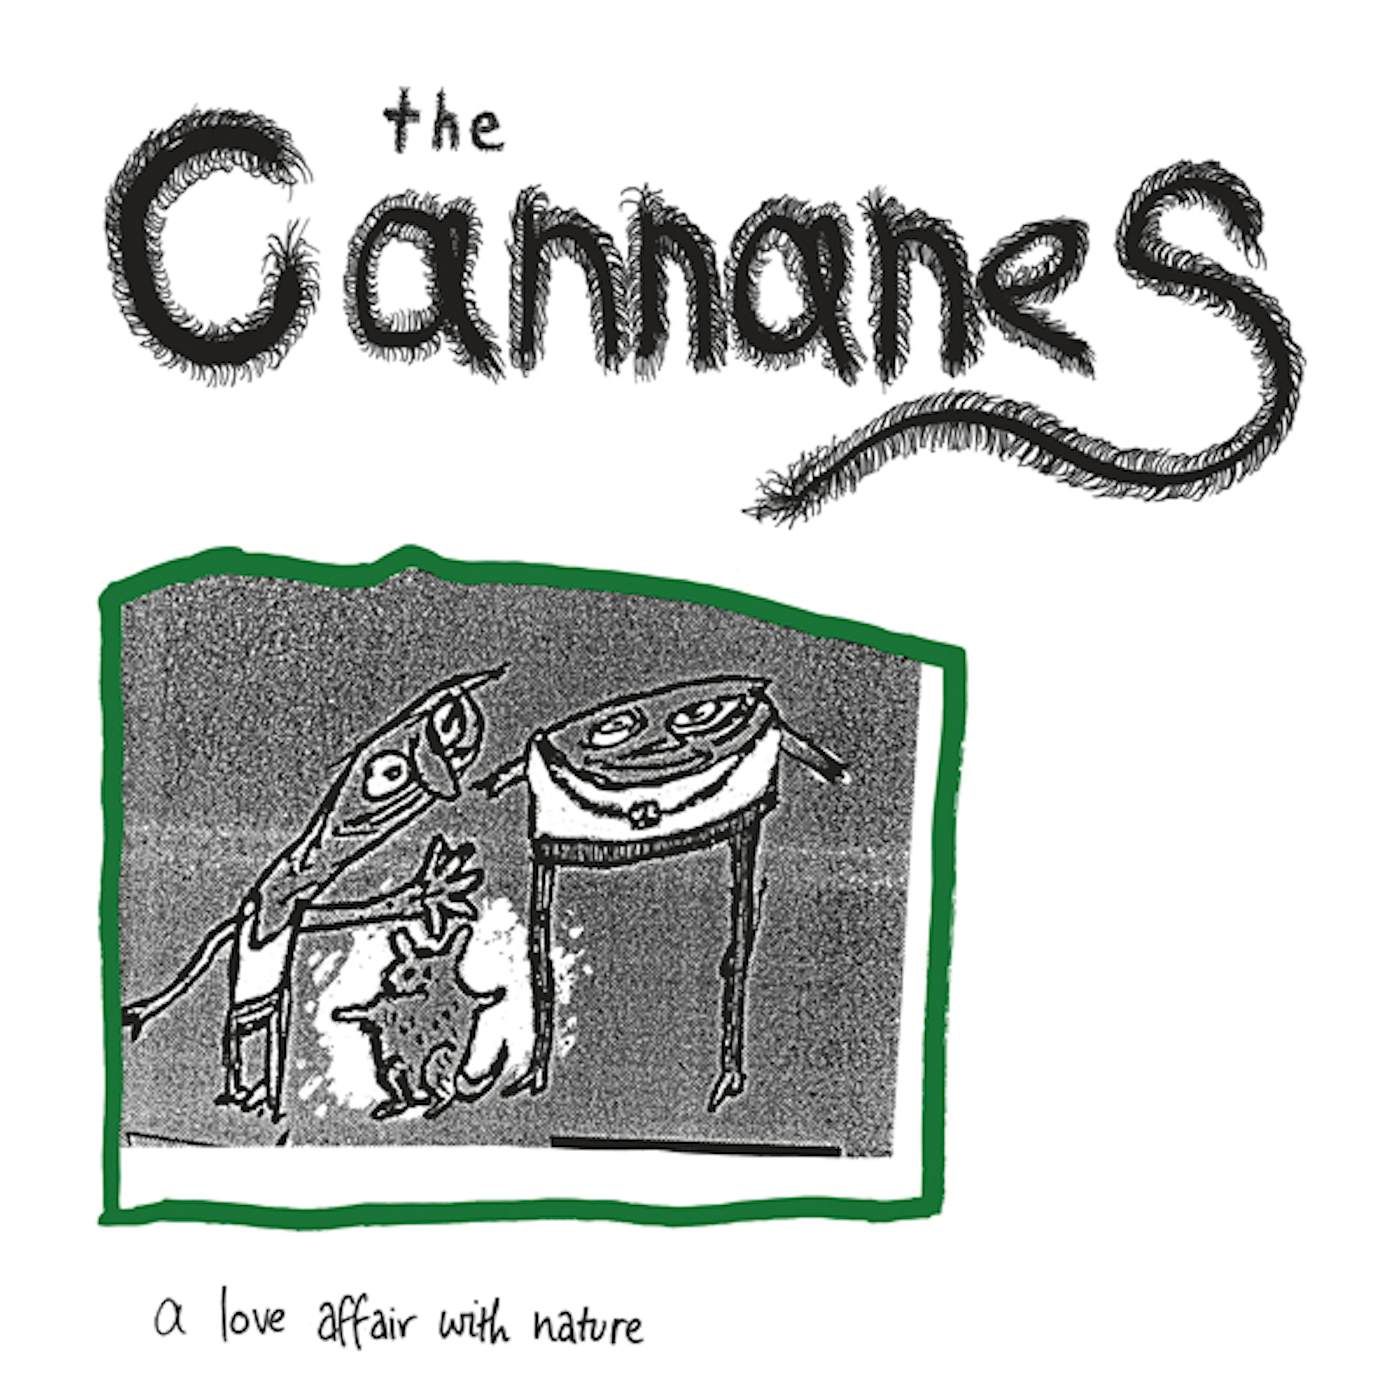 The Cannanes A Love Affair With Nature Vinyl Record